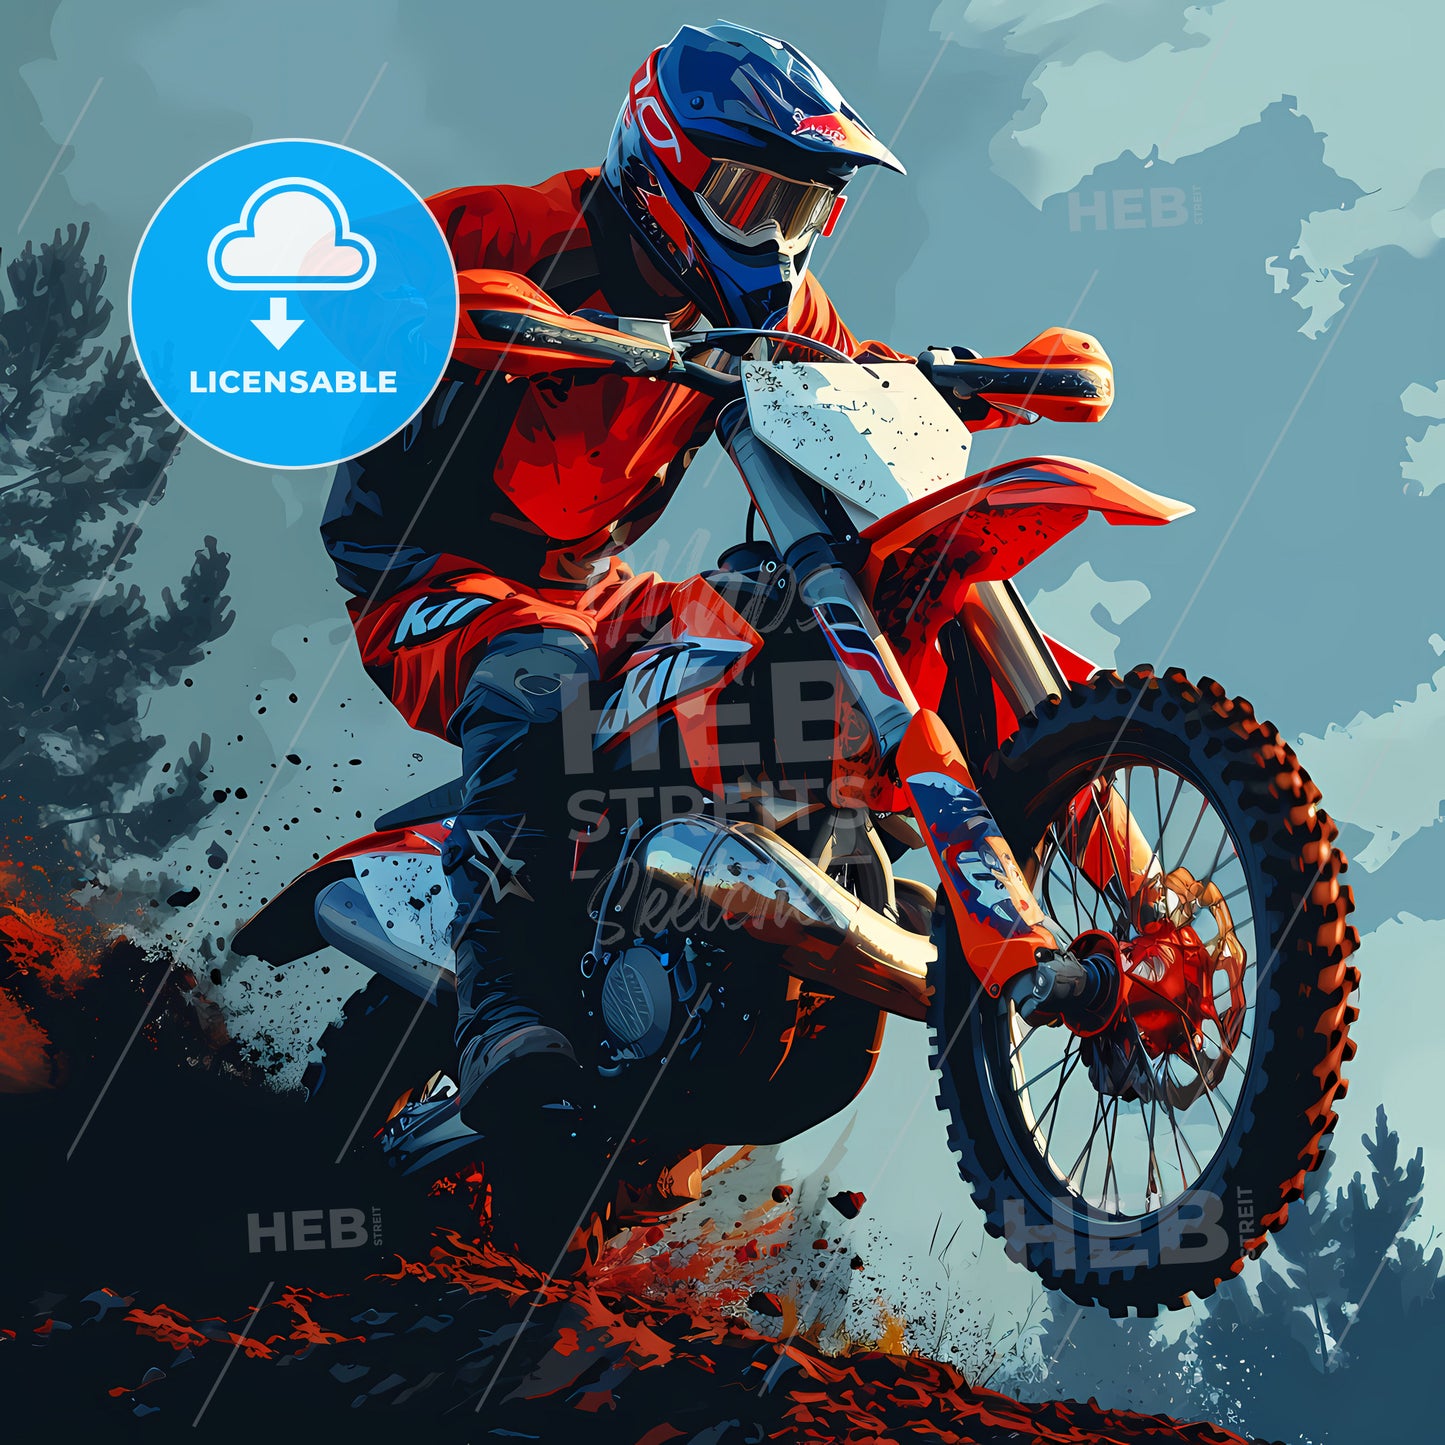 A Minimalist Motocross Racing, A Person On A Motorcycle